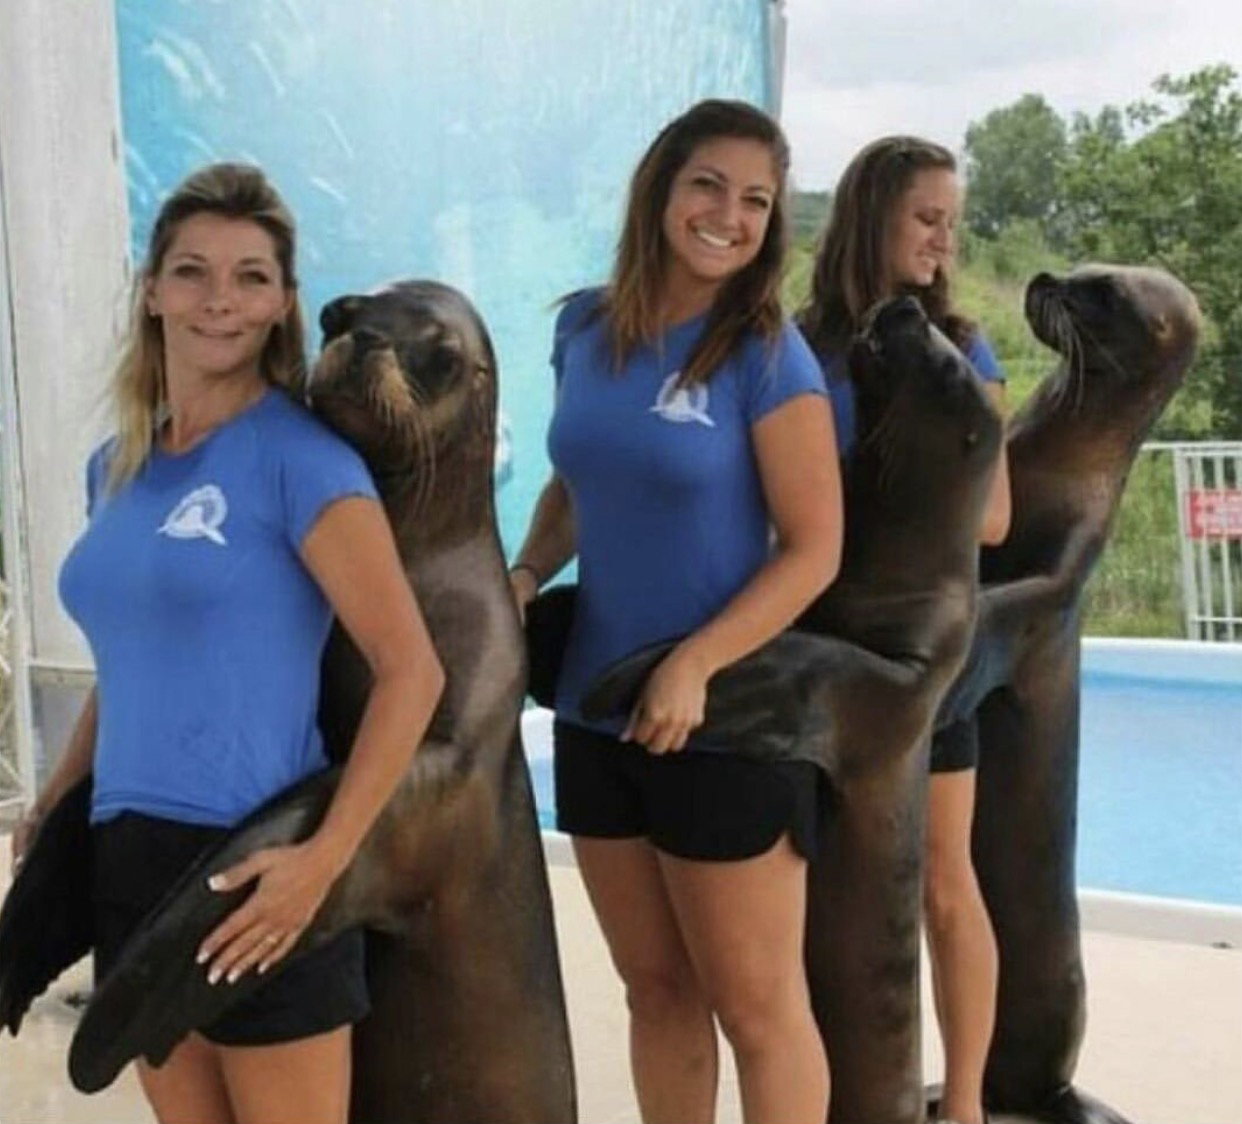 Girls snuggling with seals.